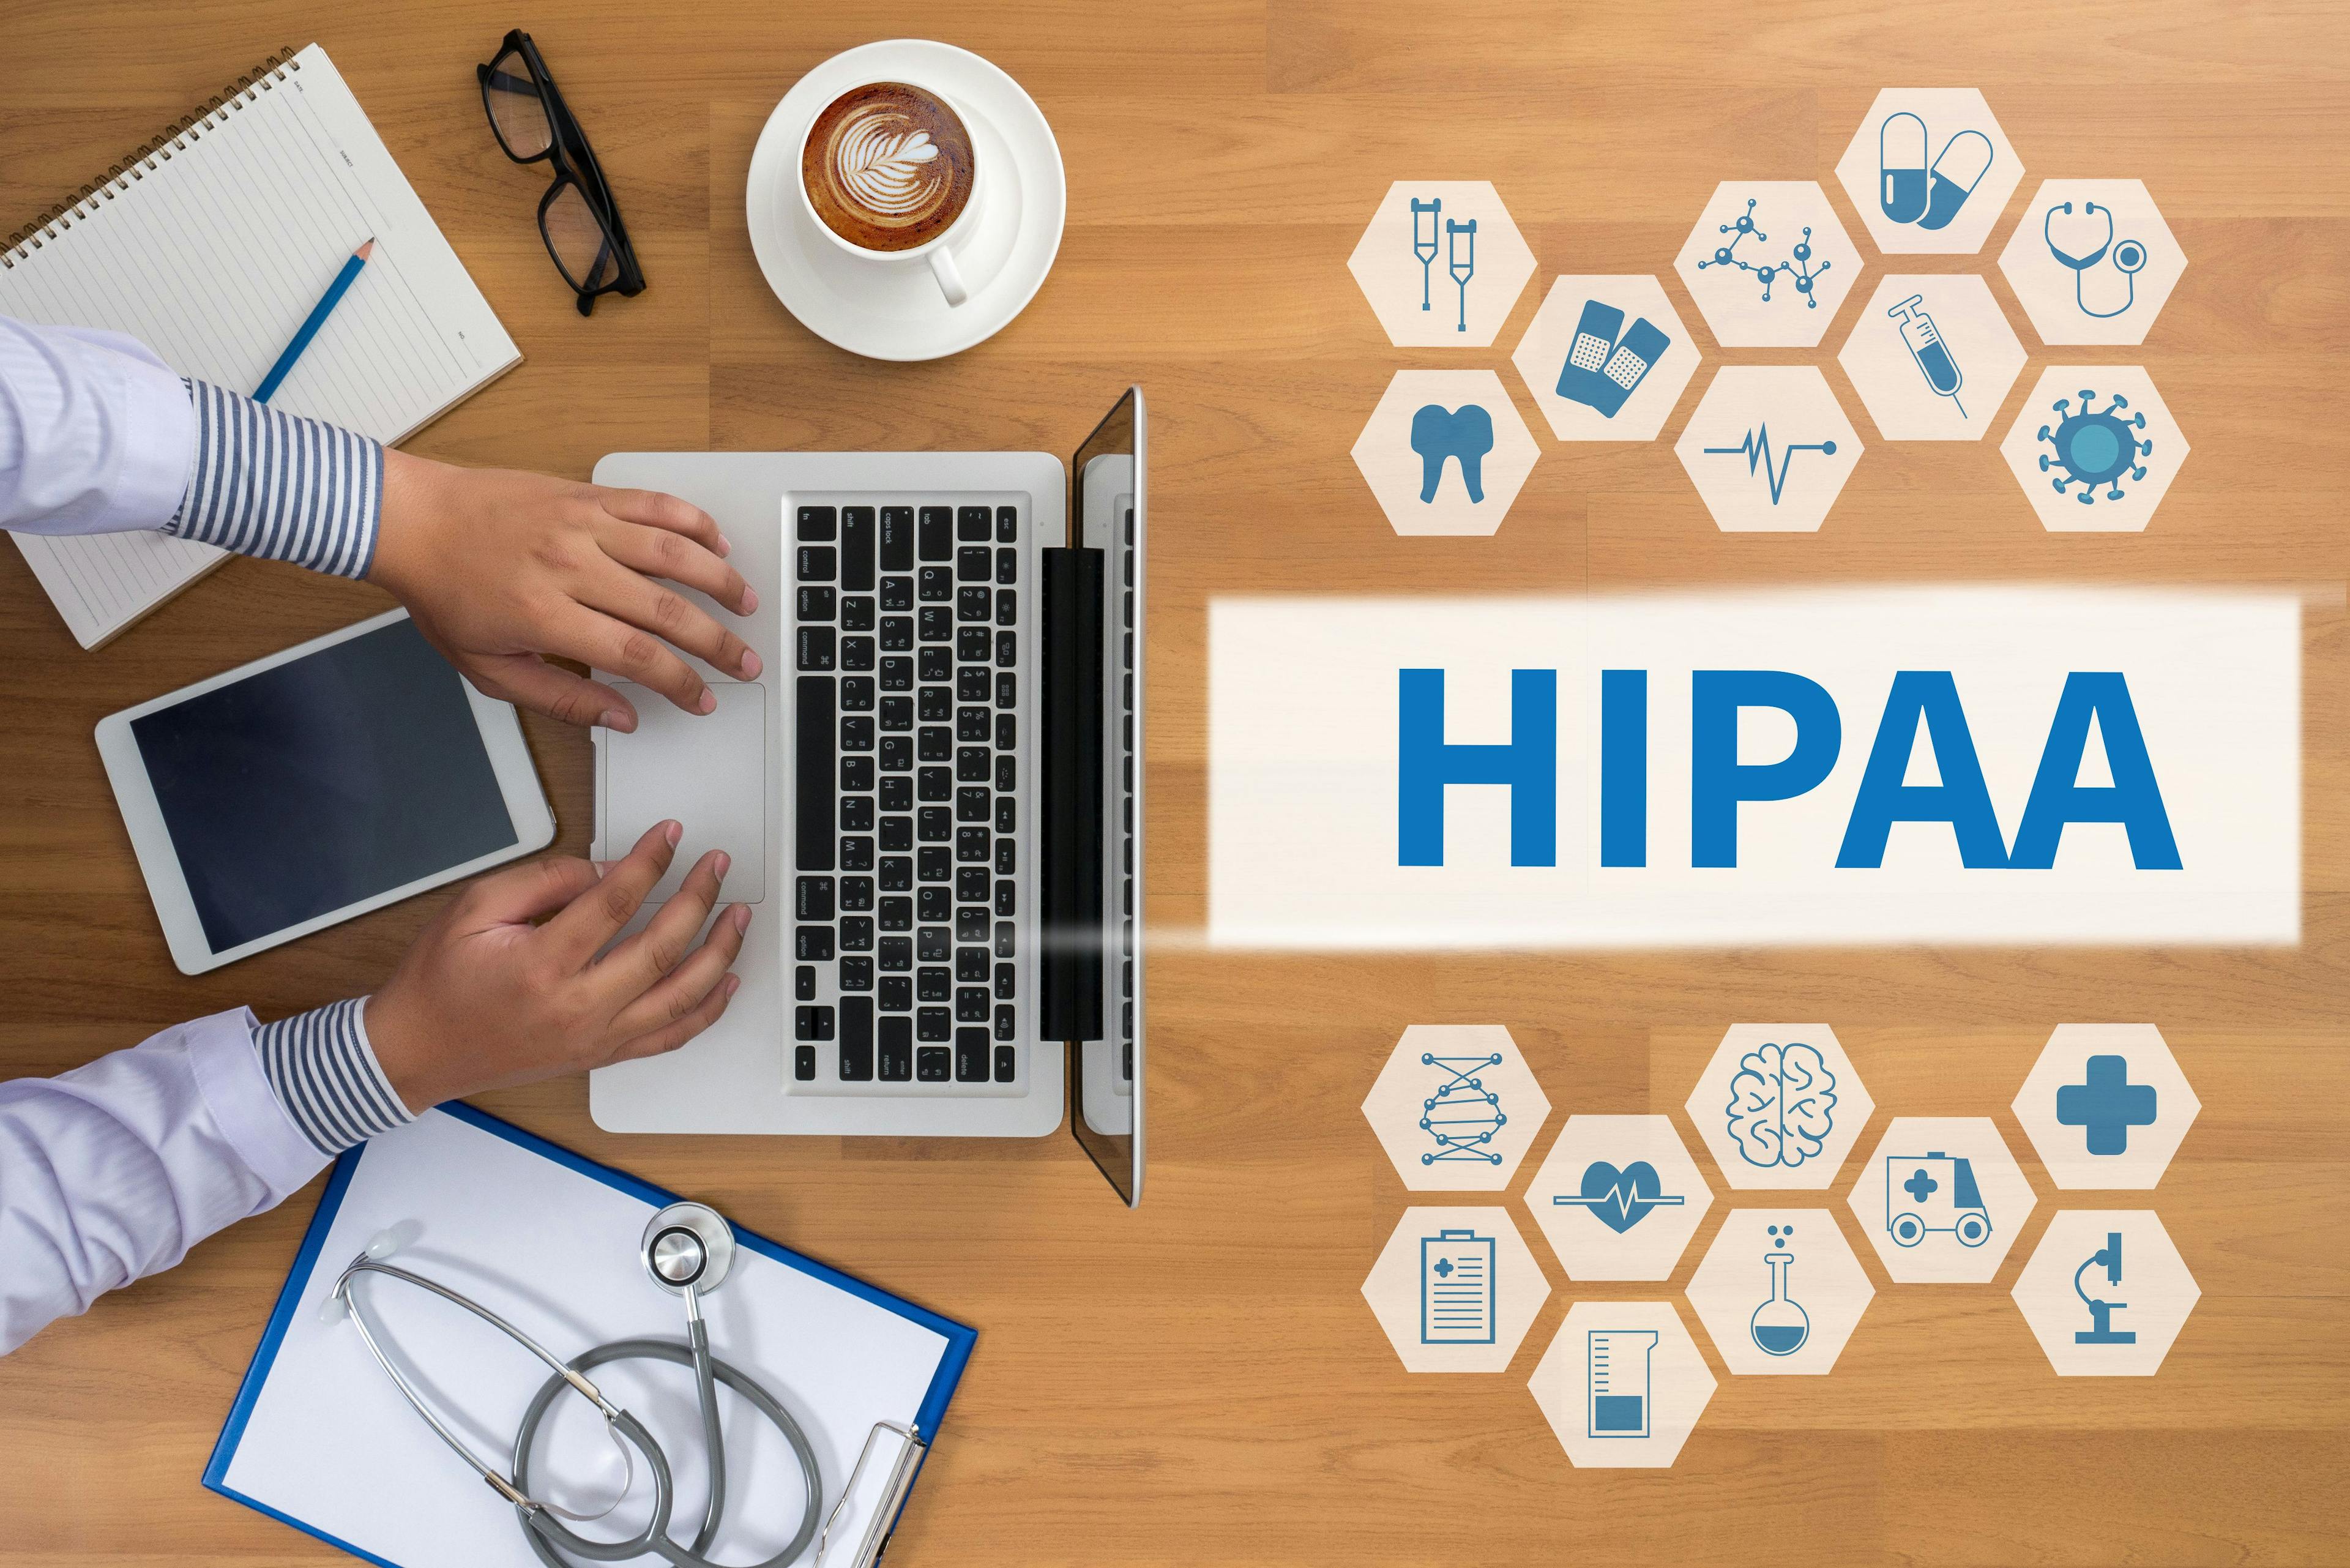 Most employees don't understand HIPAA rules: ©Onephoto -stock.adobe.com